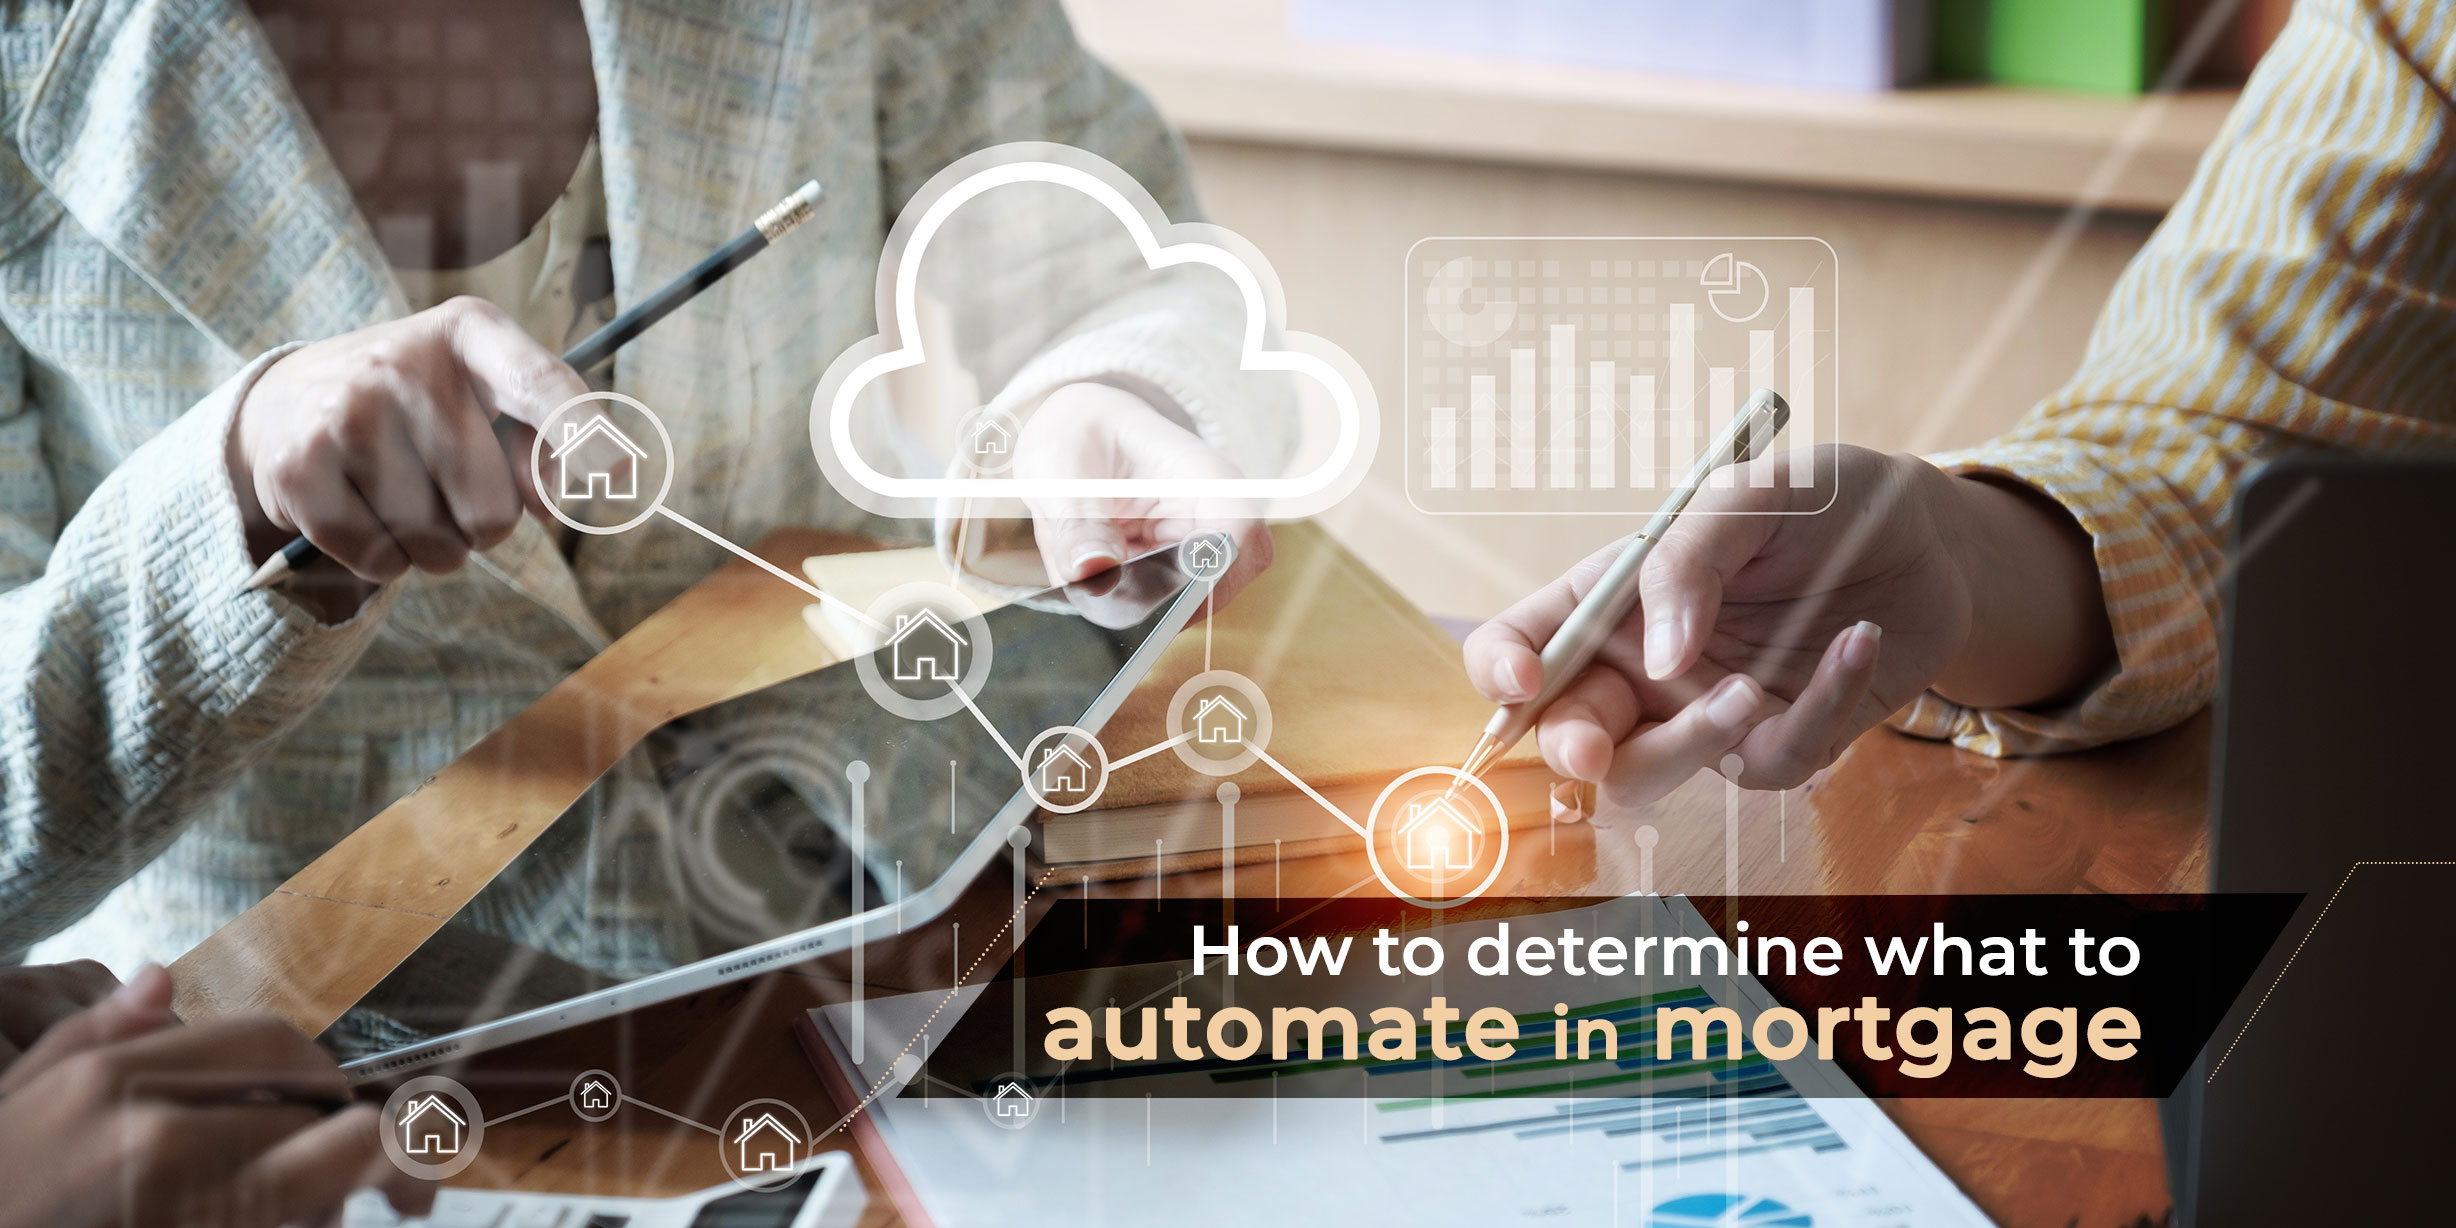 How to determine what to automate in mortgage